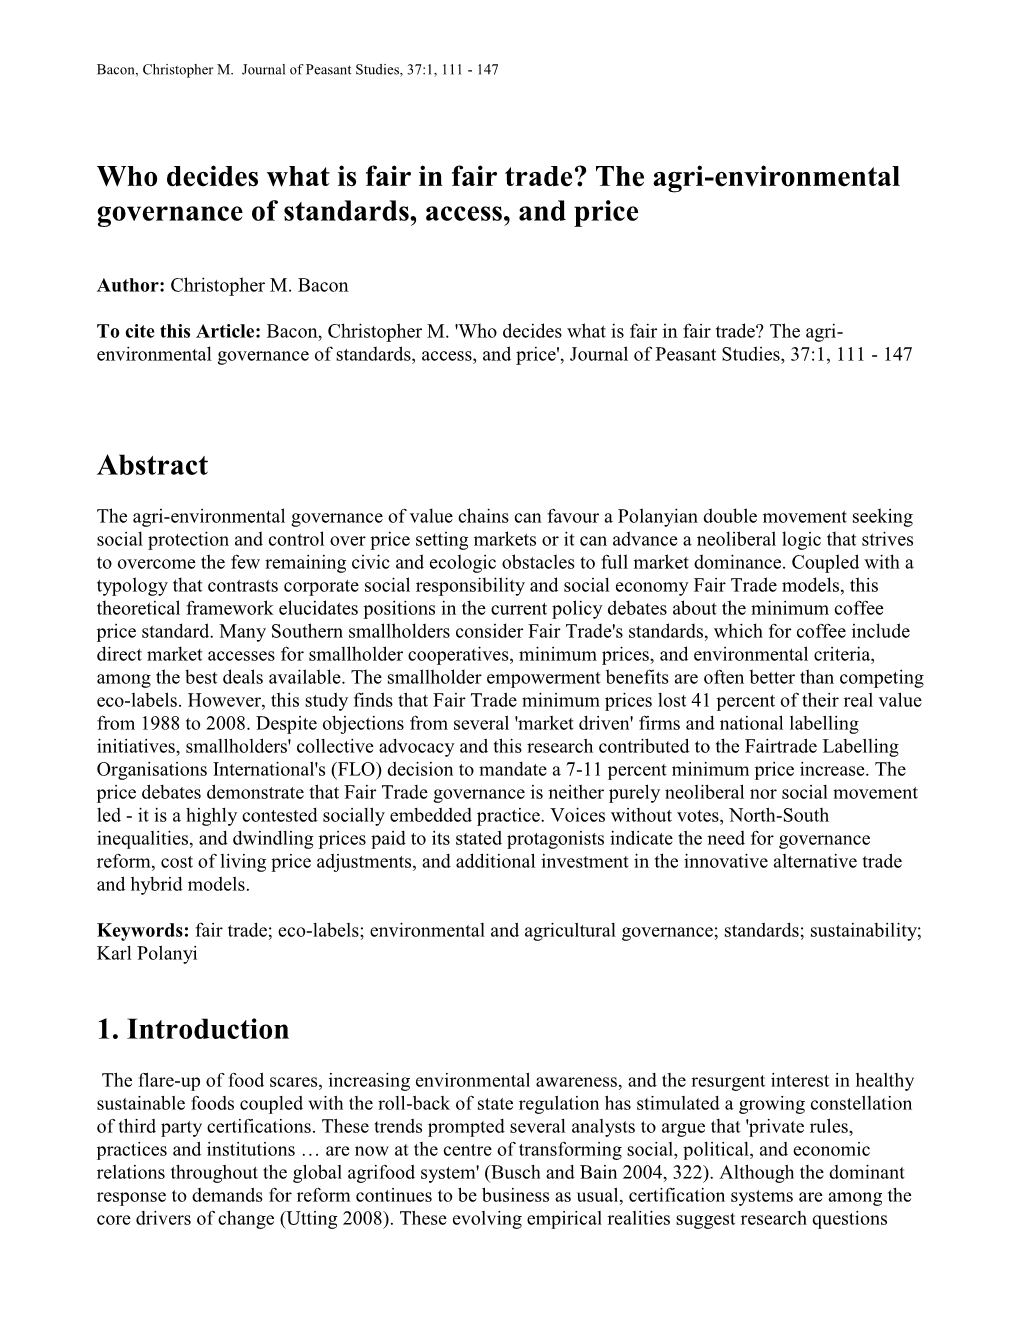 Who Decides What Is Fair in Fair Trade? the Agri-Environmental Governance of Standards, Access, and Price